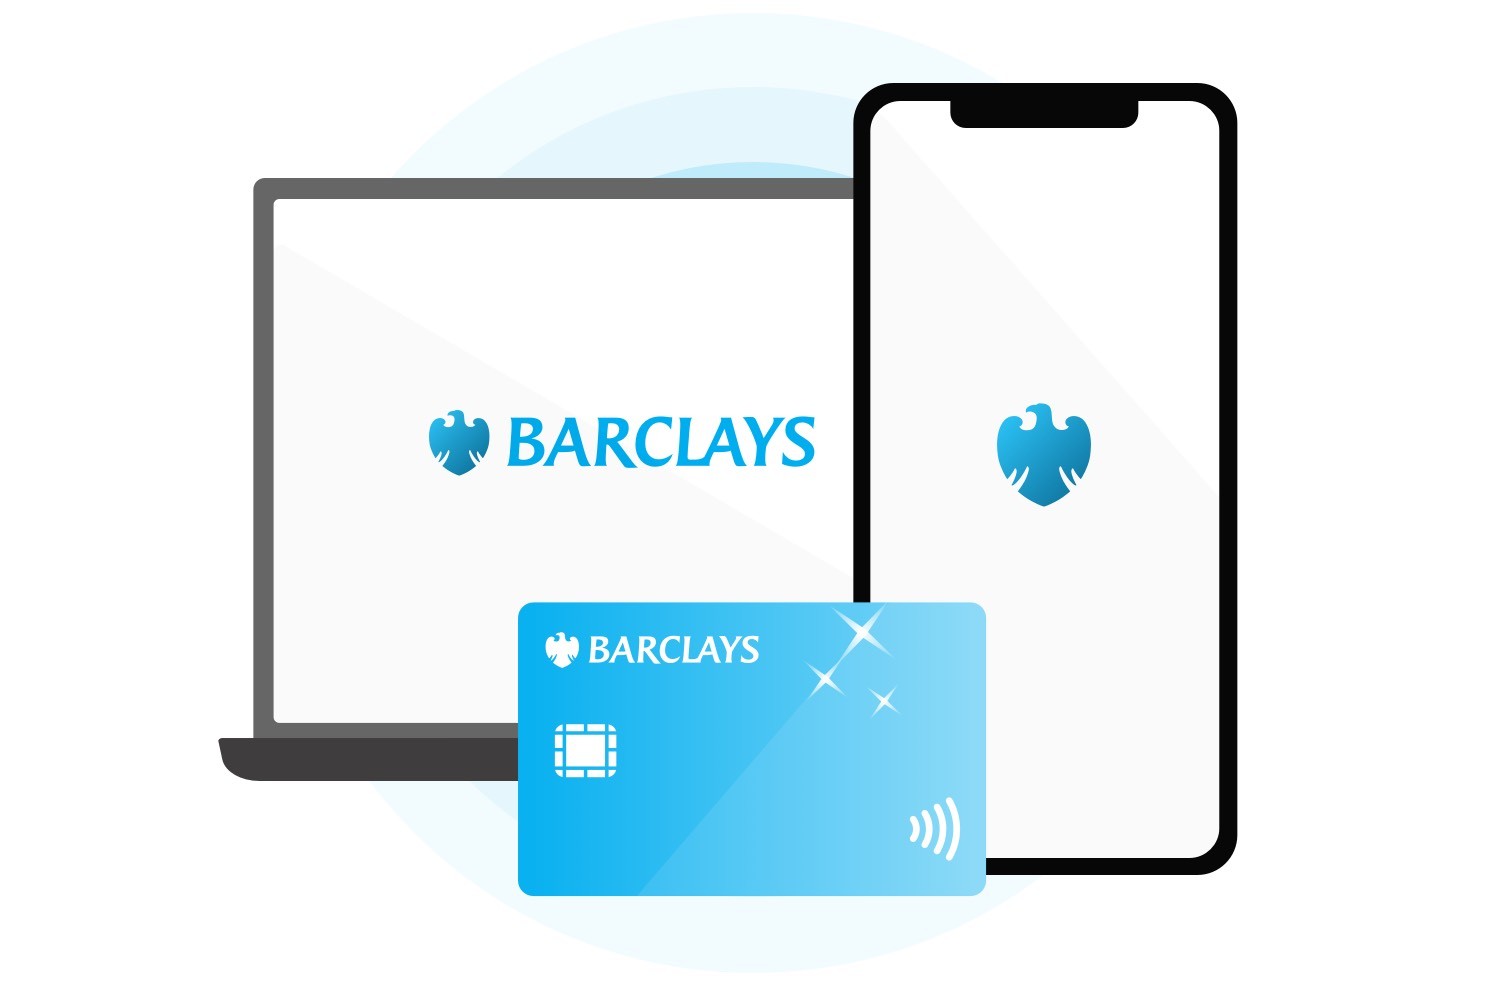 It's quick and easy to download and register for the Barclays app